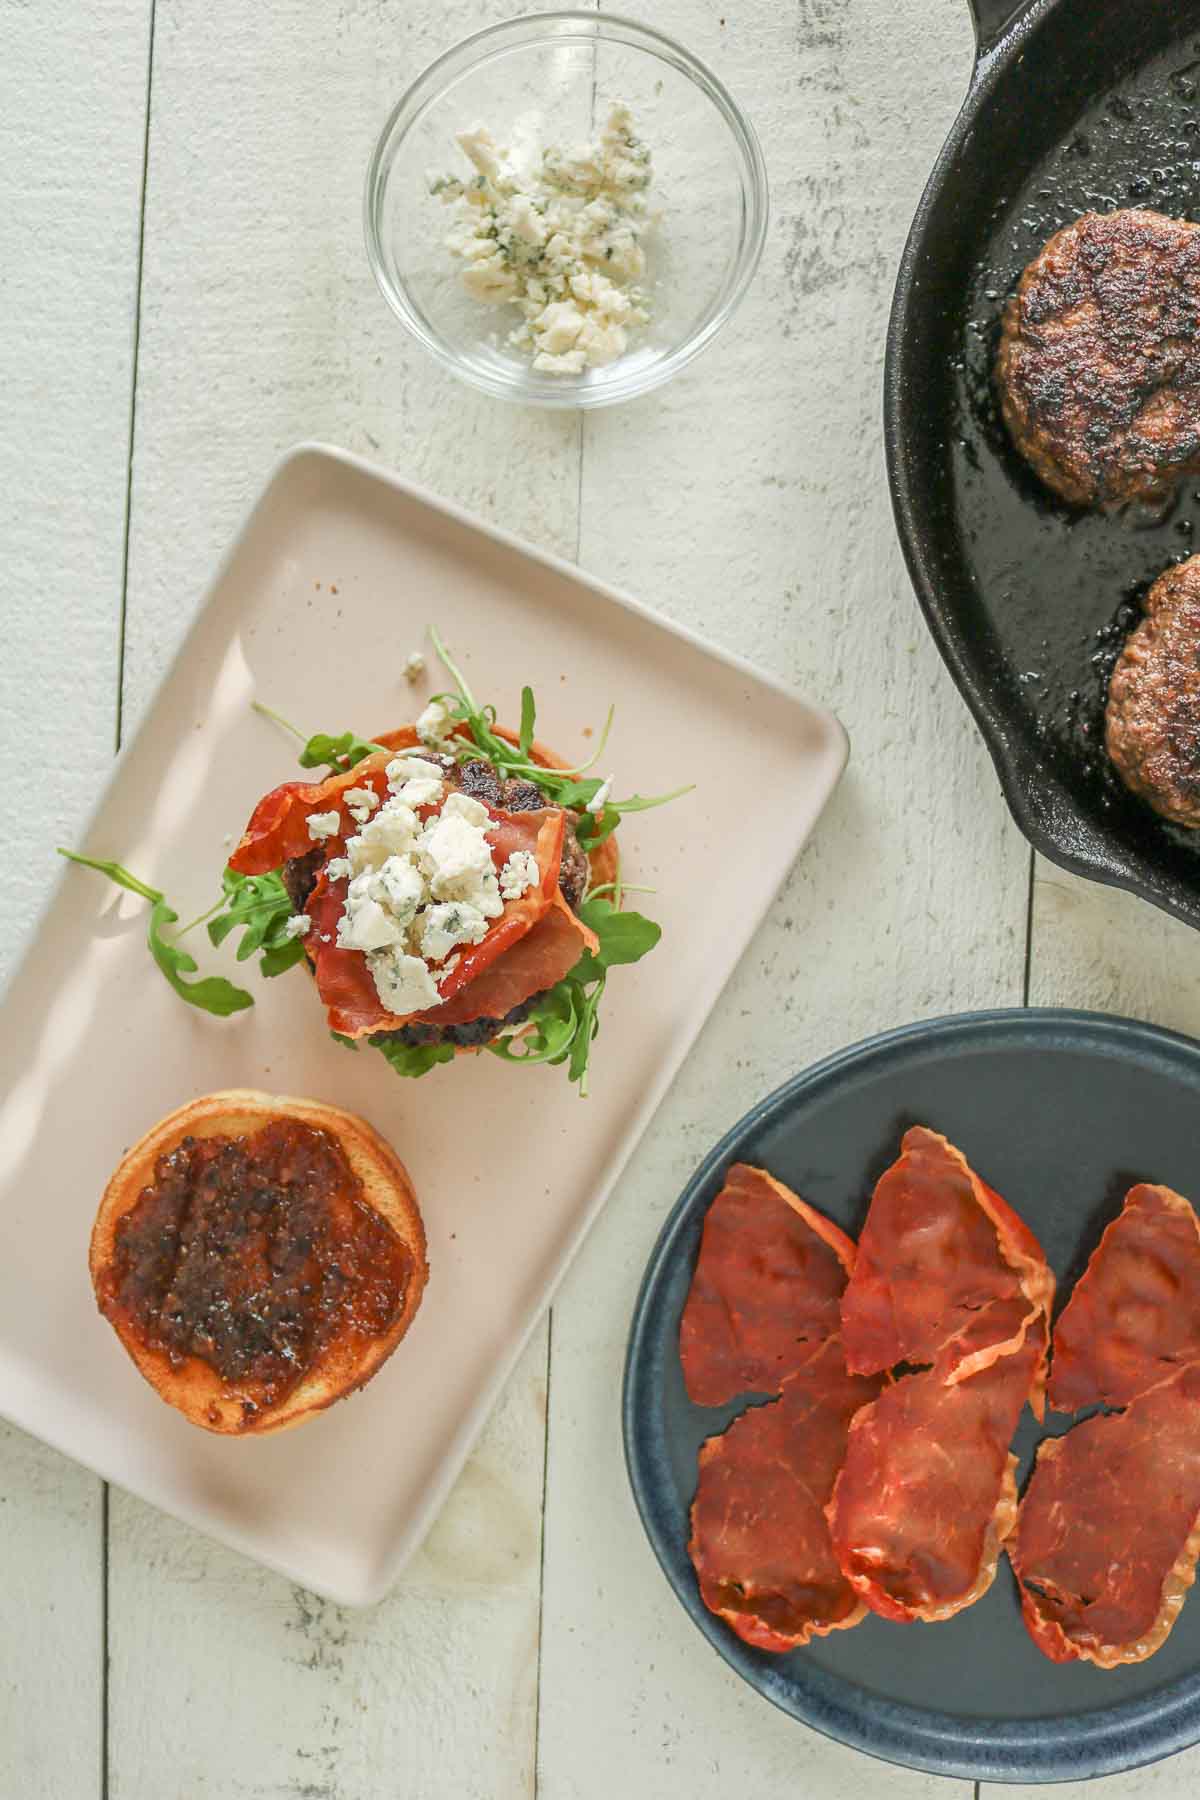 Assembling a homemade burger with crispy prosciutto, blue cheese, arugula and fig jam.